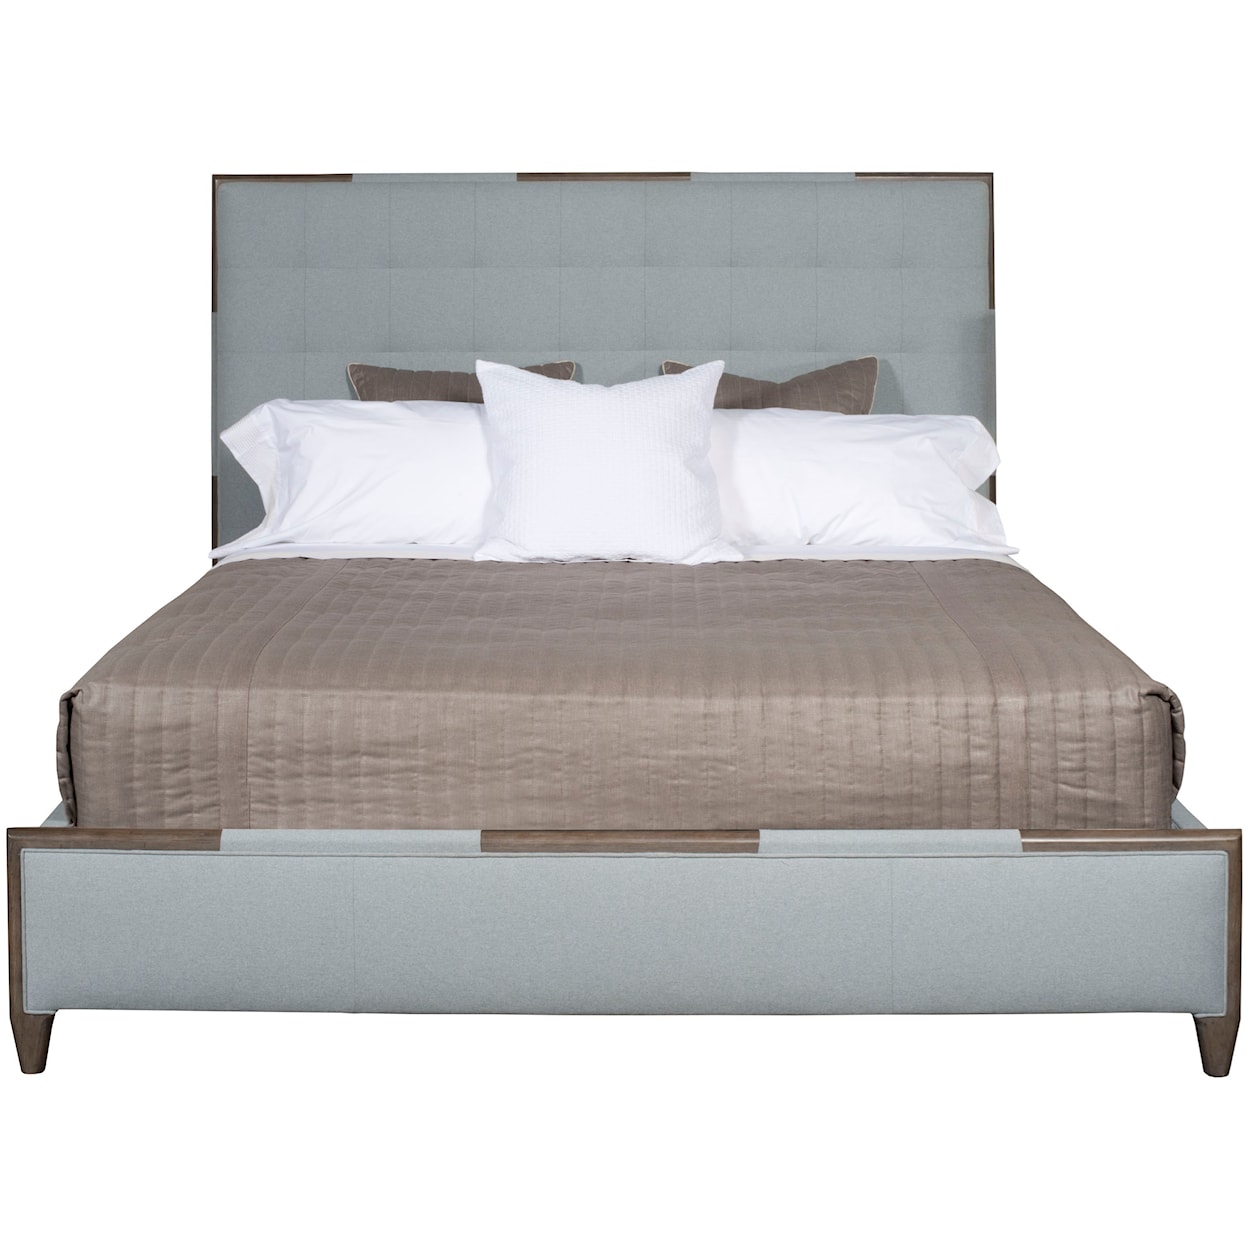 Vanguard Furniture Chatfield by Thom Filicia Home King Upholstered Bed